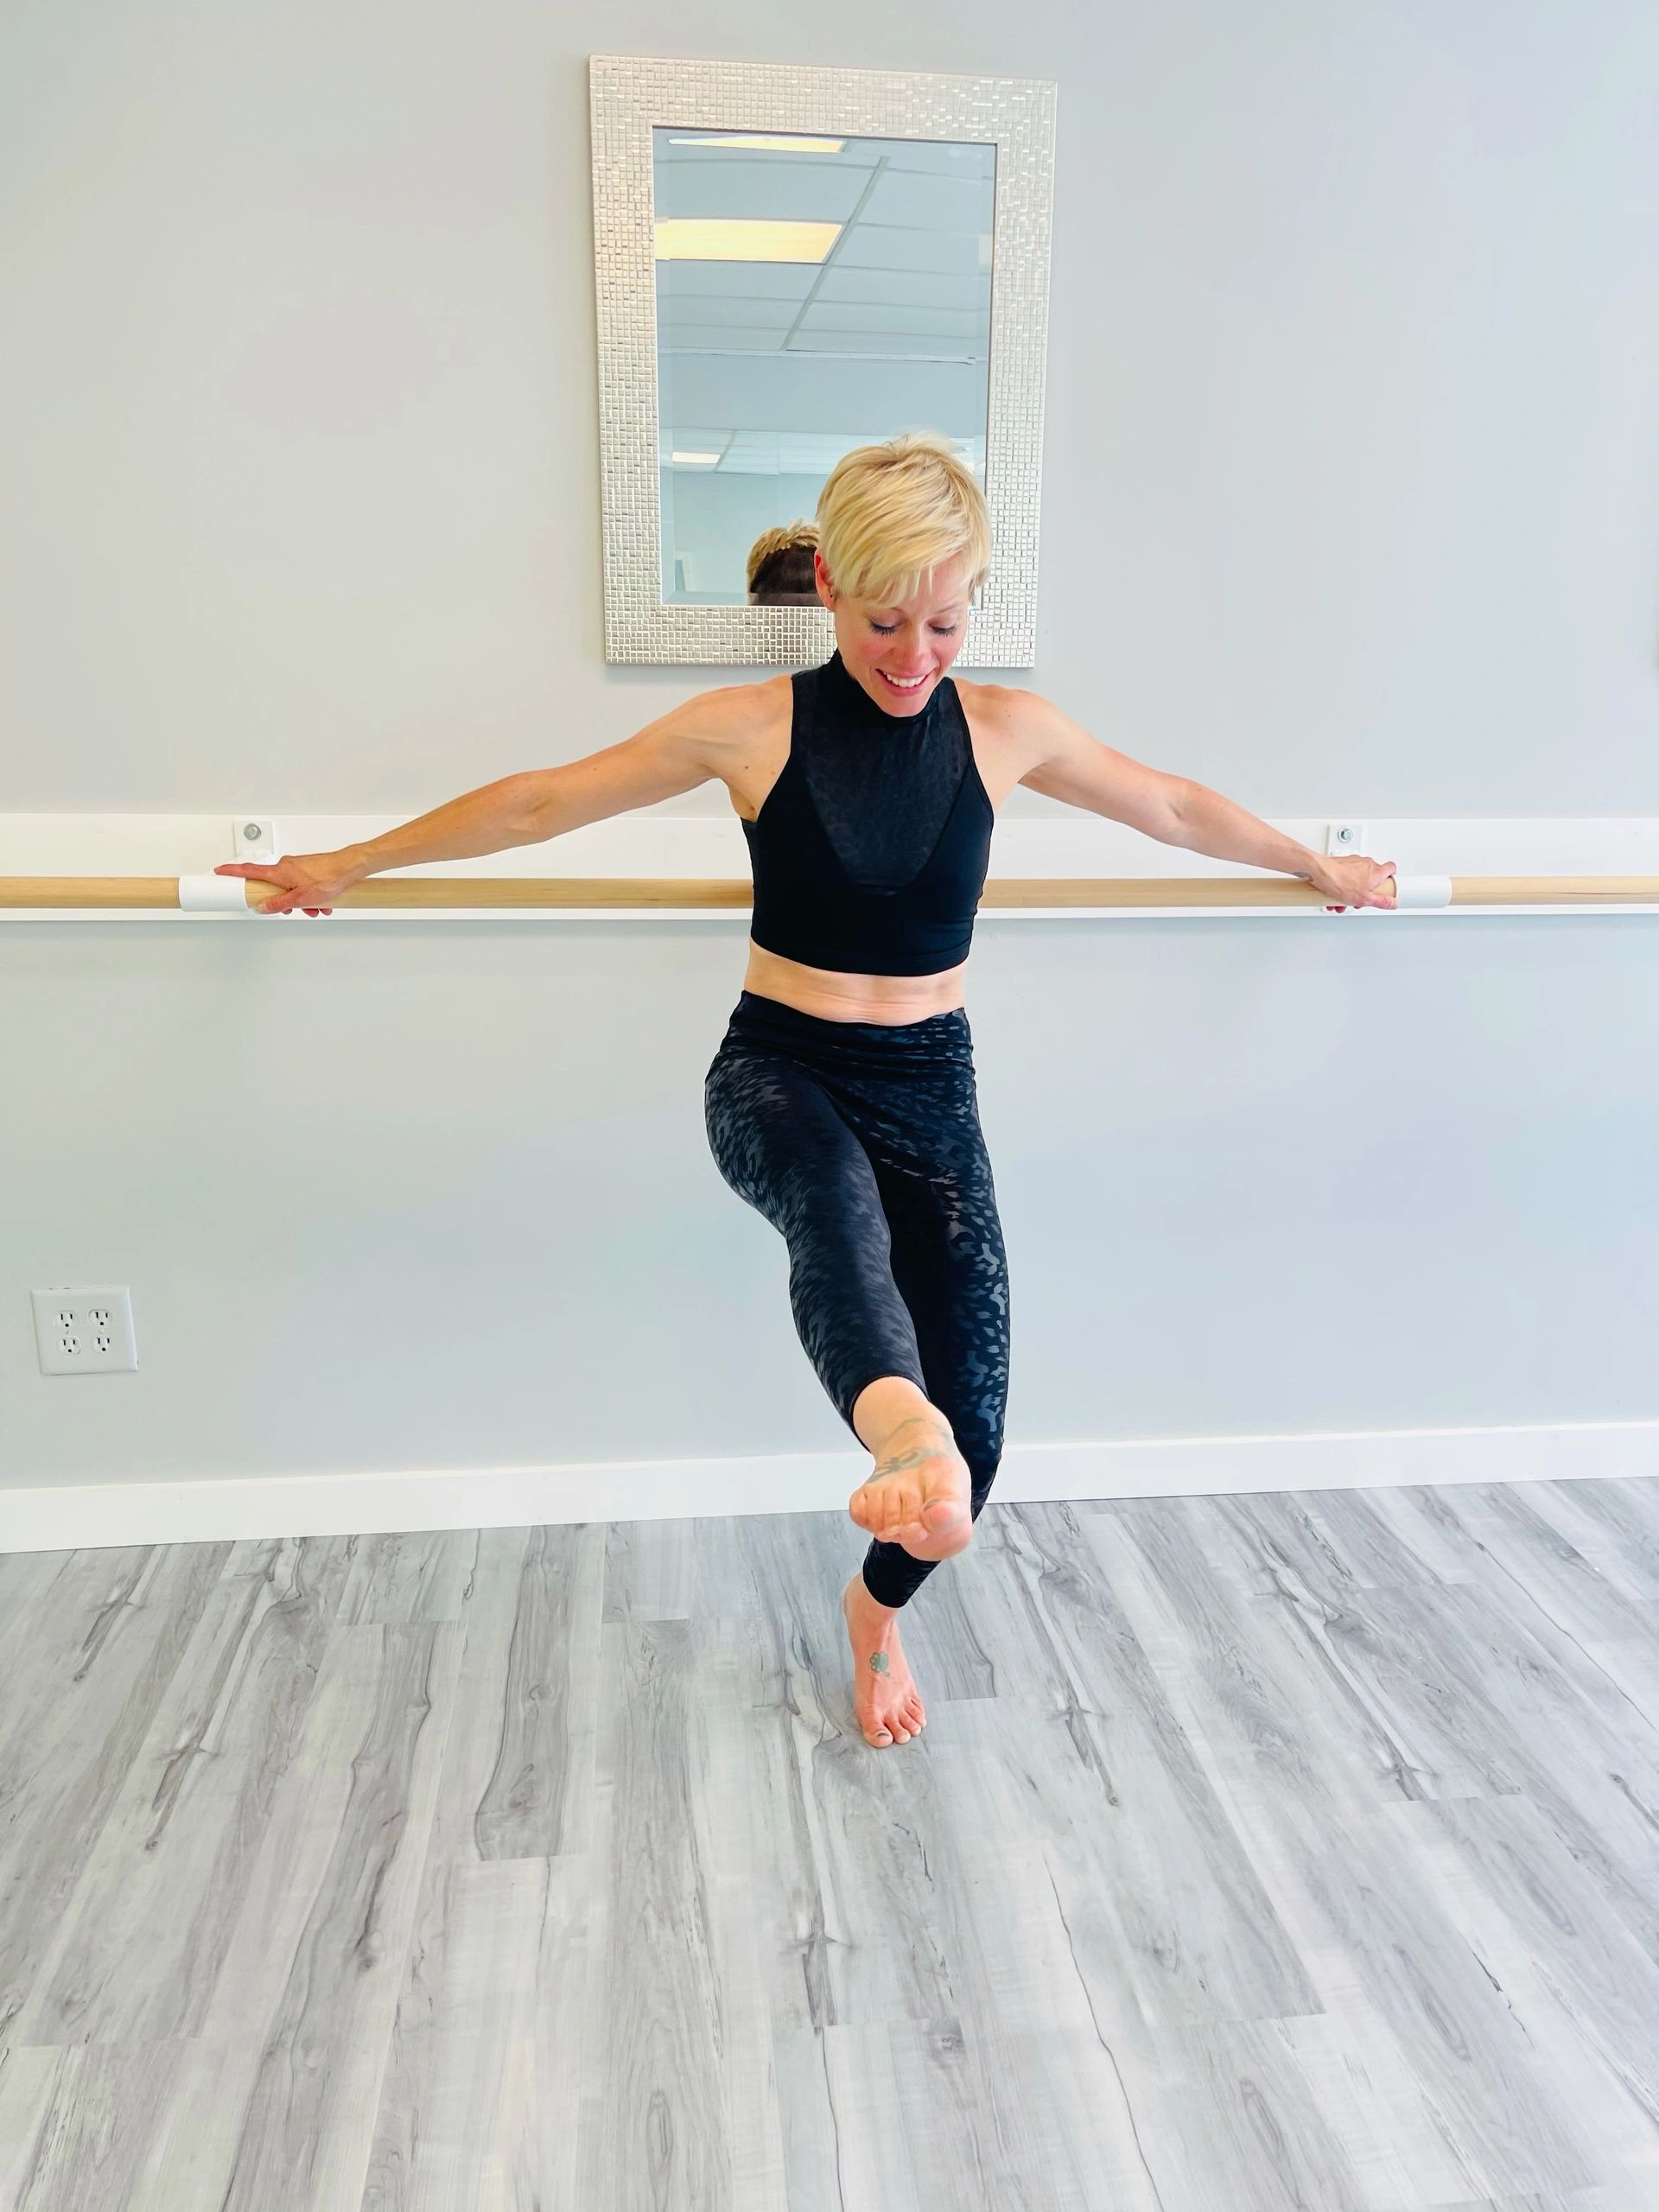 THE BEST 10 Barre Classes near MIDDLETON, ID 83644 - Last Updated